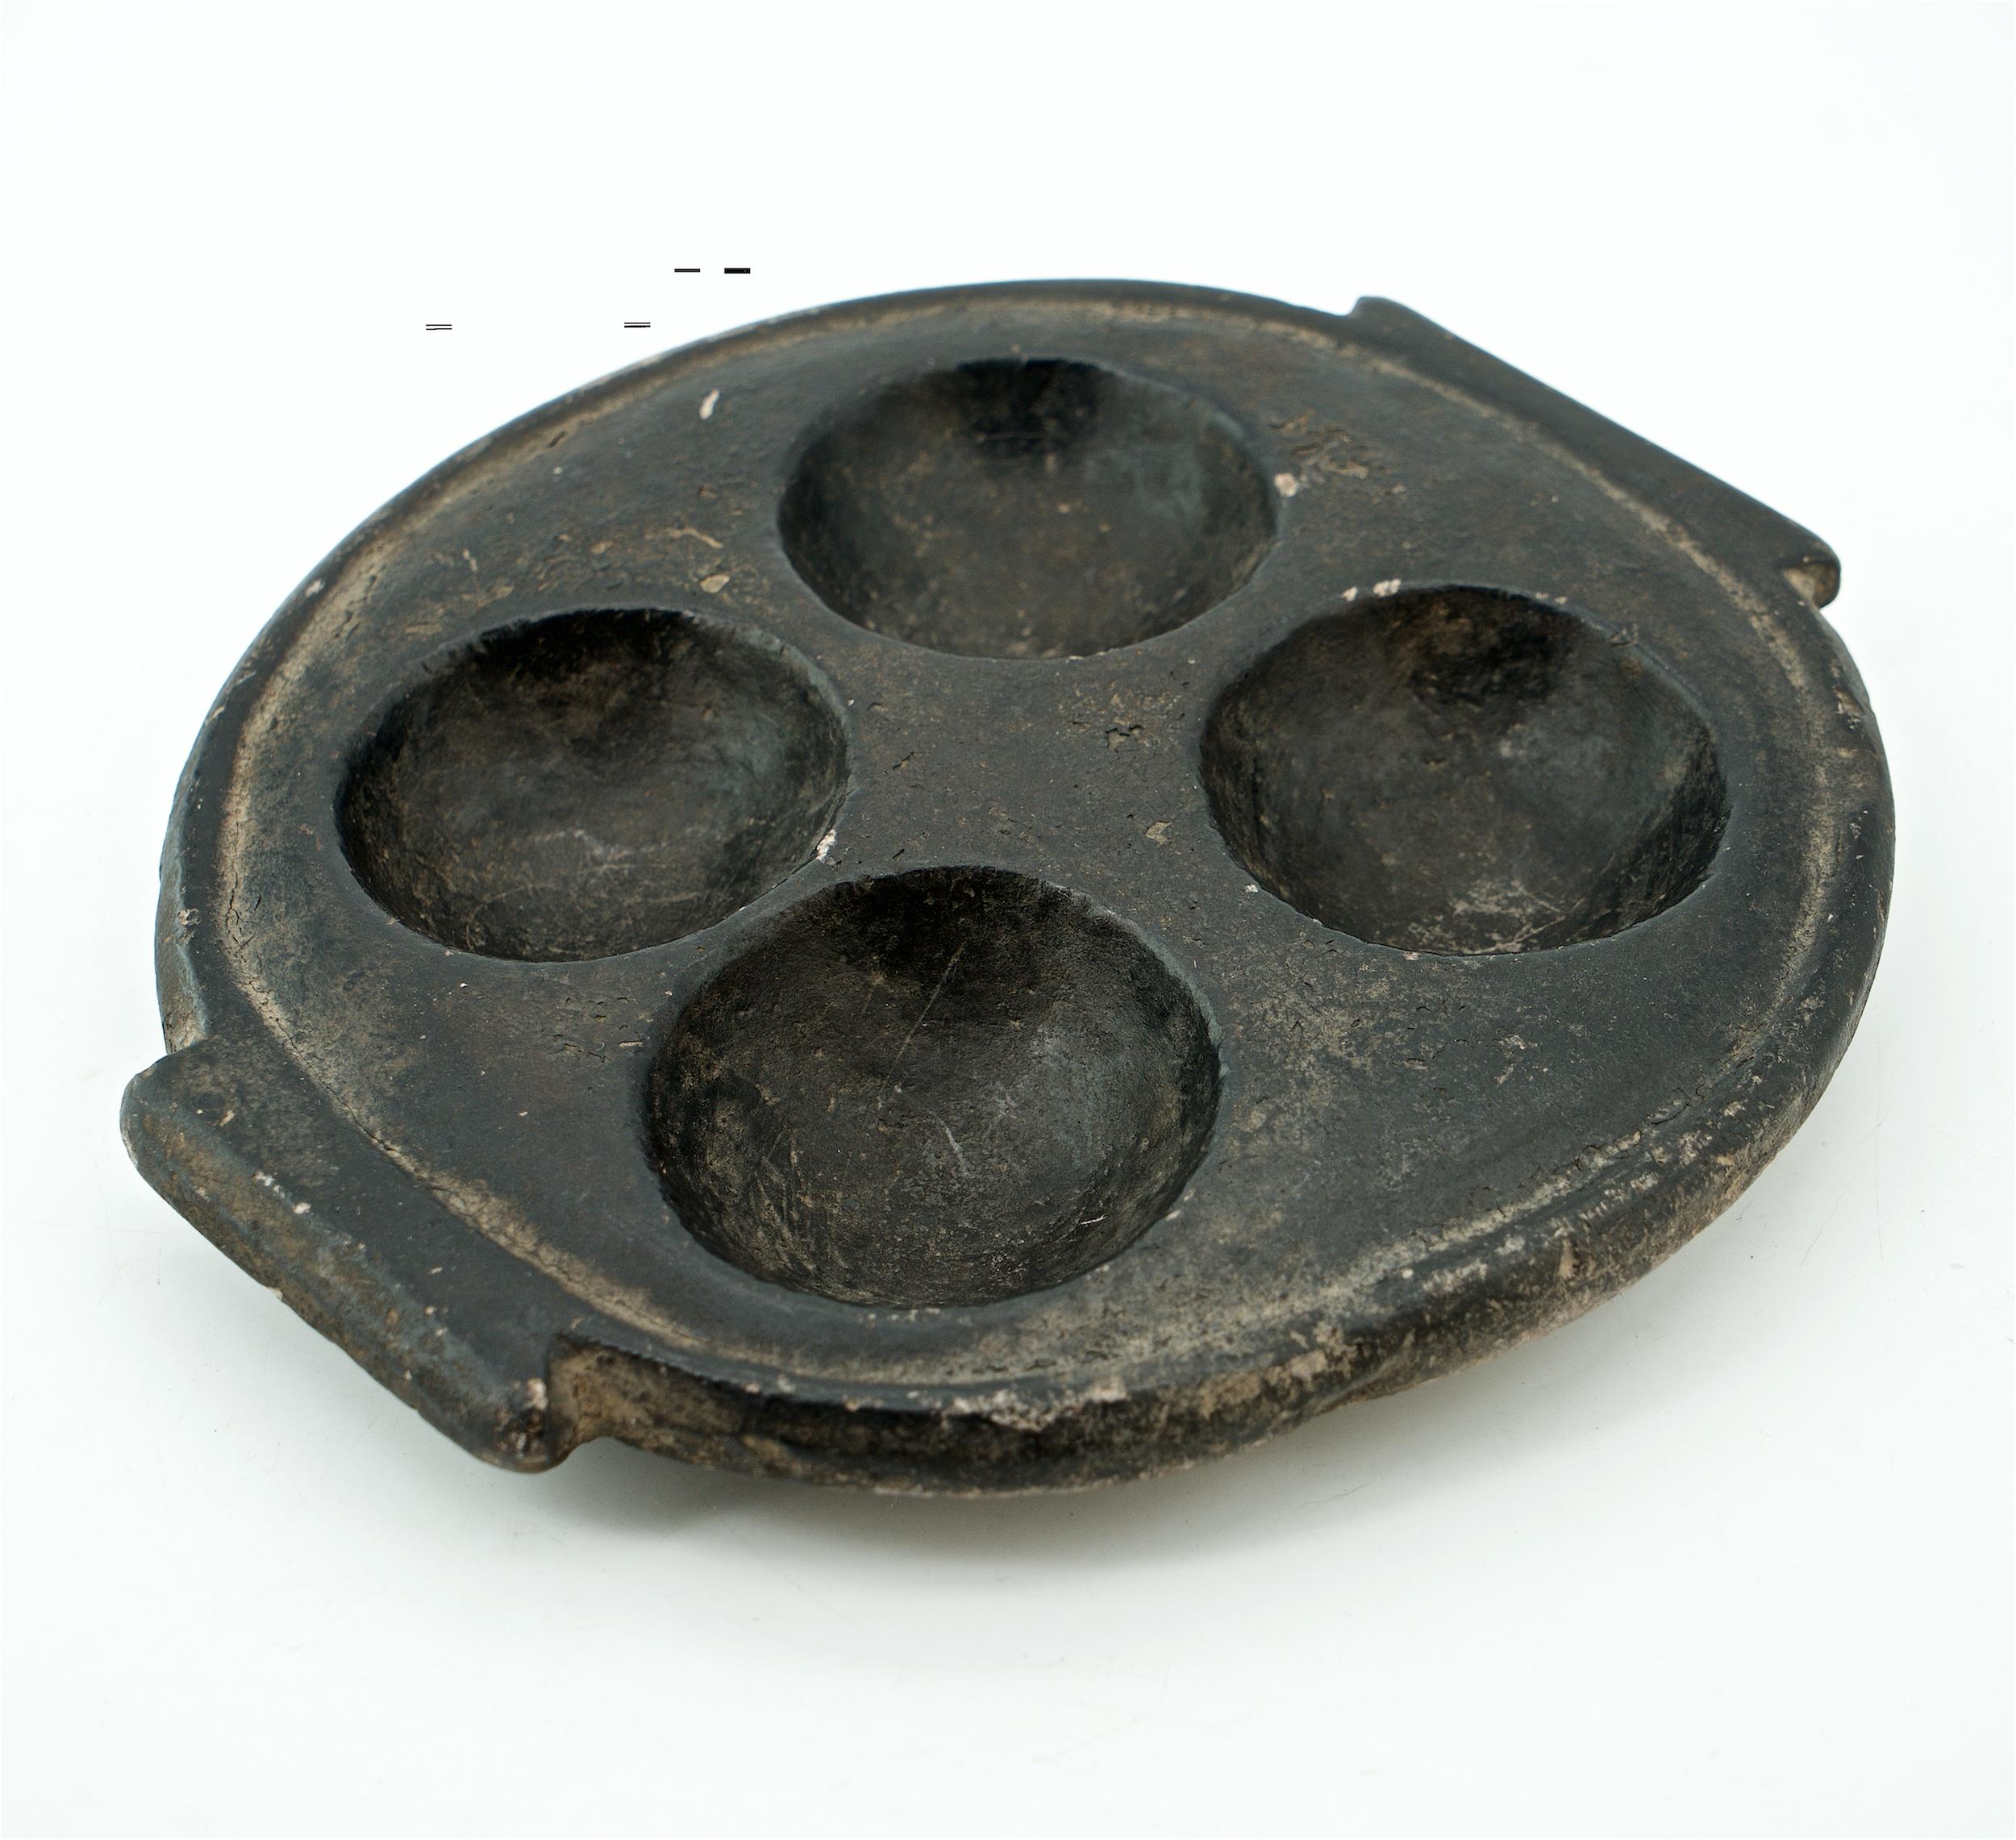 African Black Stone Palette Dish Bowl Ashtray Relief Sculpture In Good Condition For Sale In Hyattsville, MD